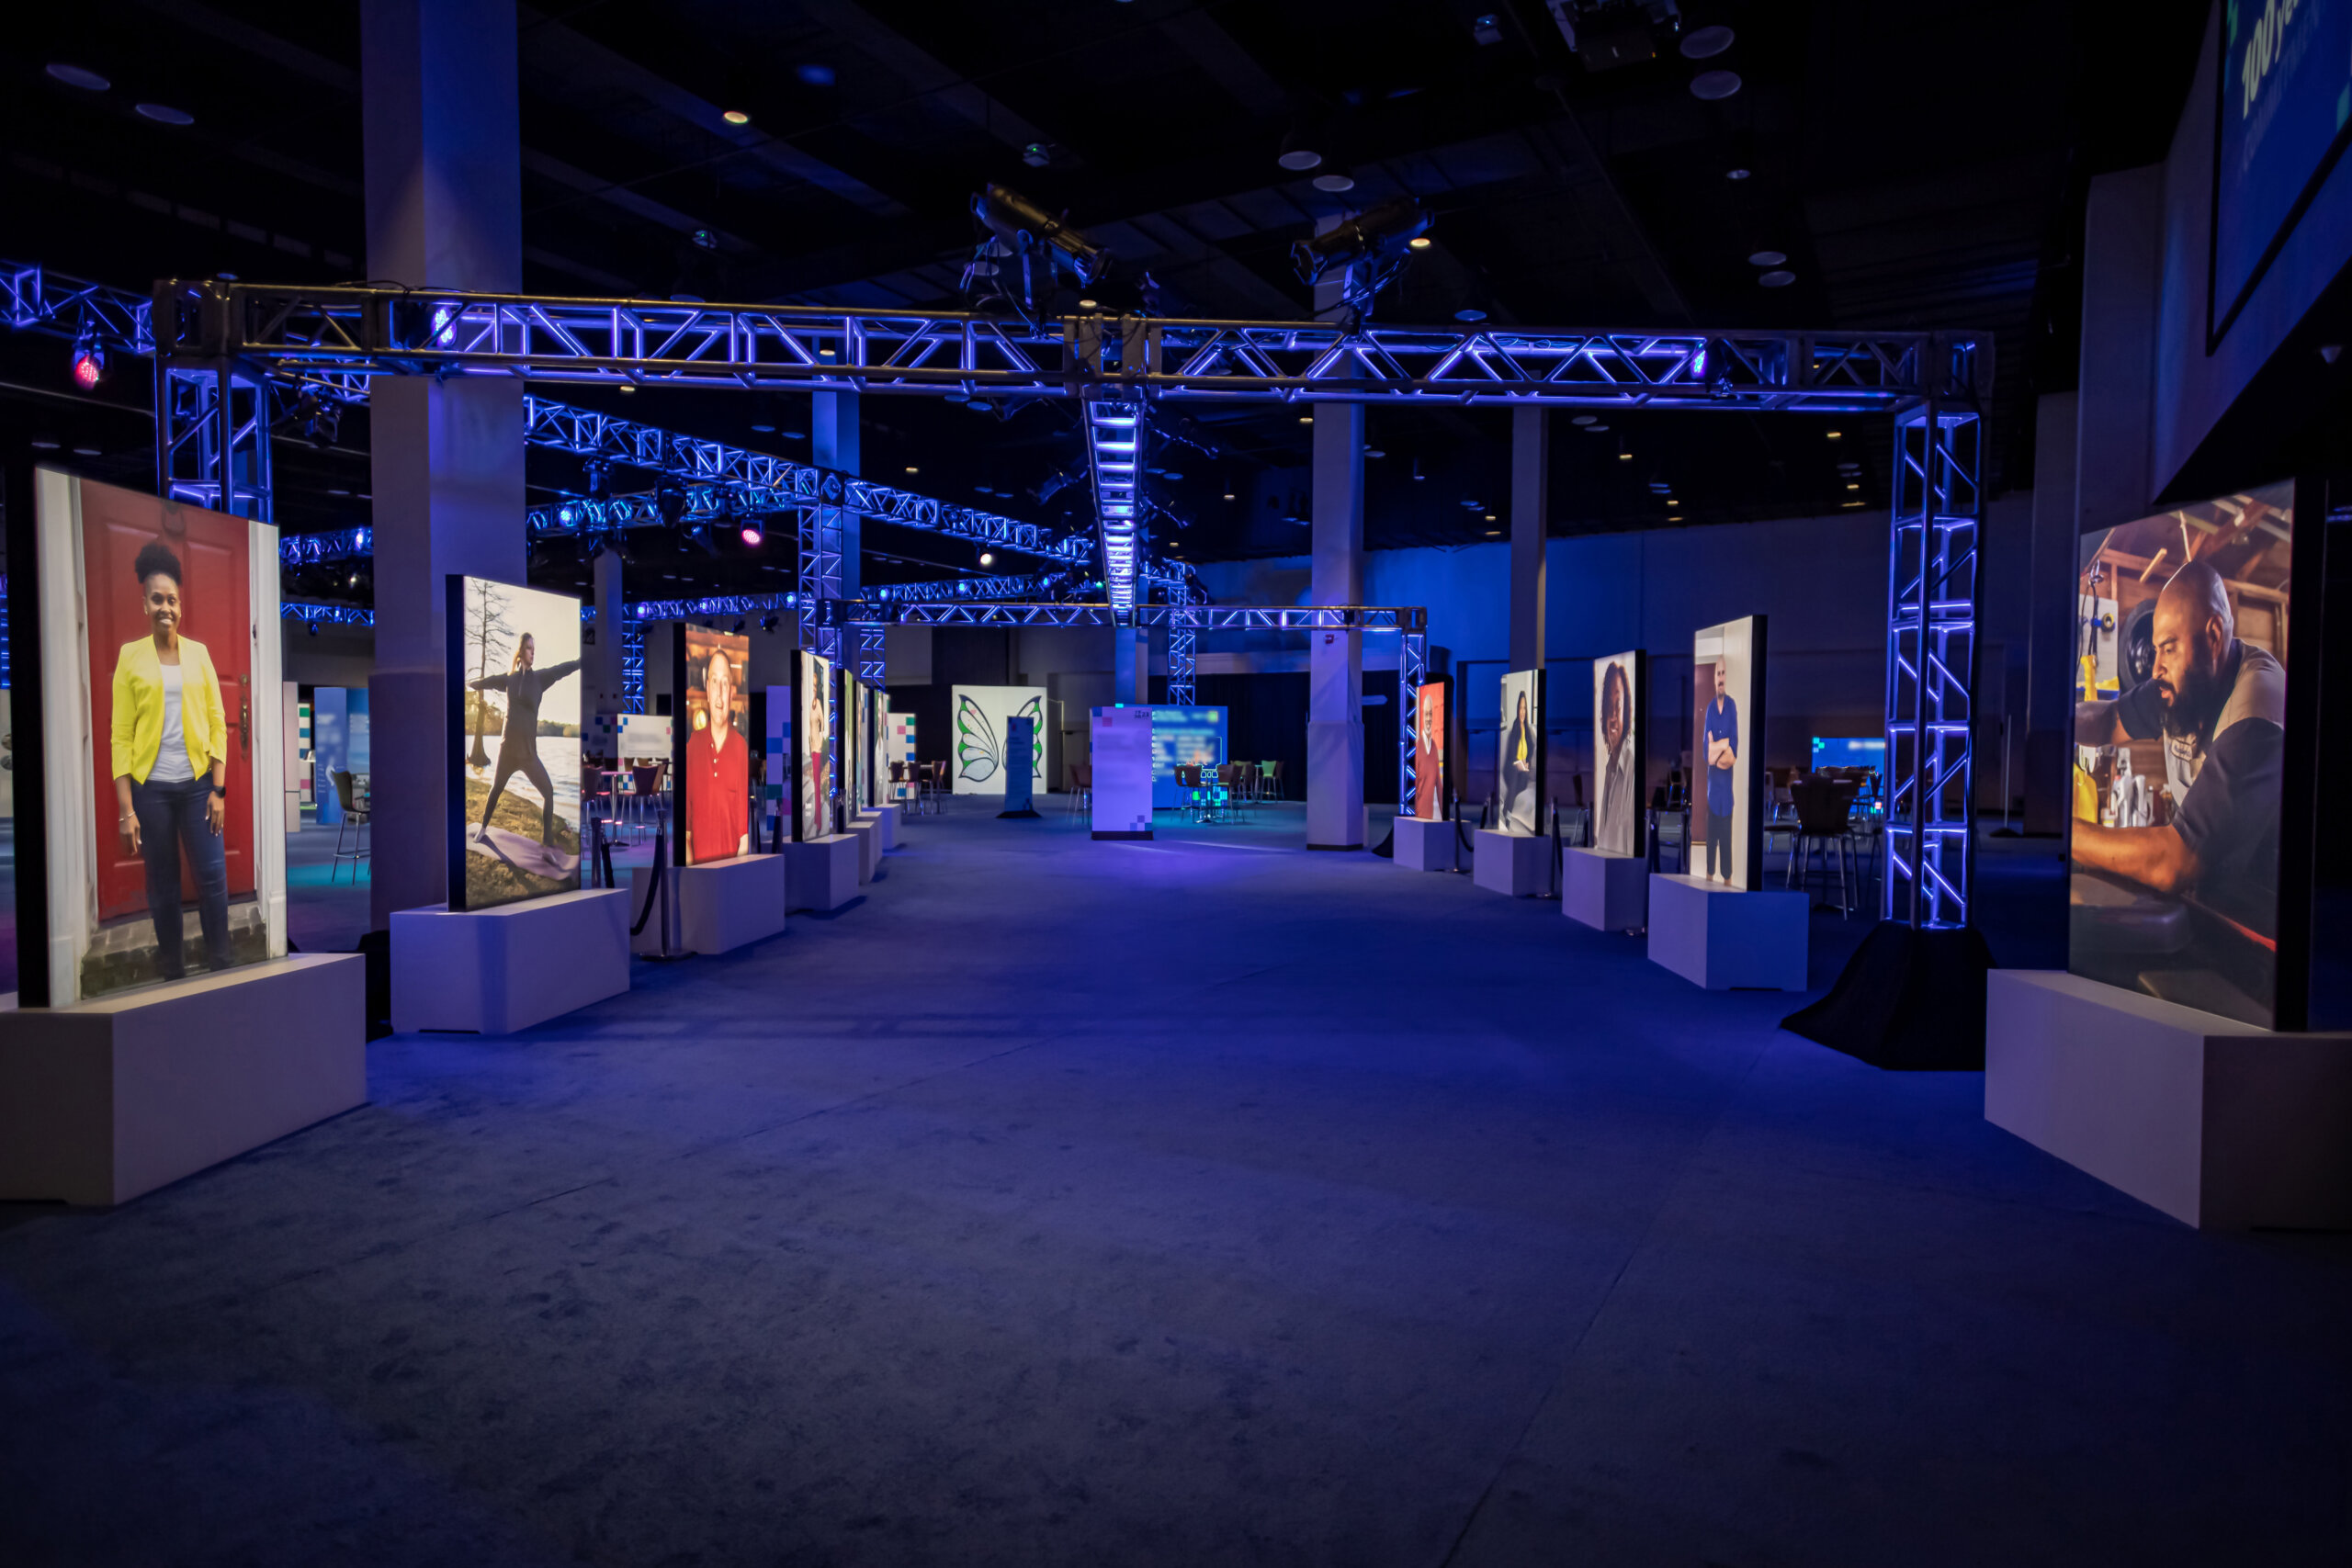 Impress Your Attendees with Imaginative Sets In The Pacific Ballroom